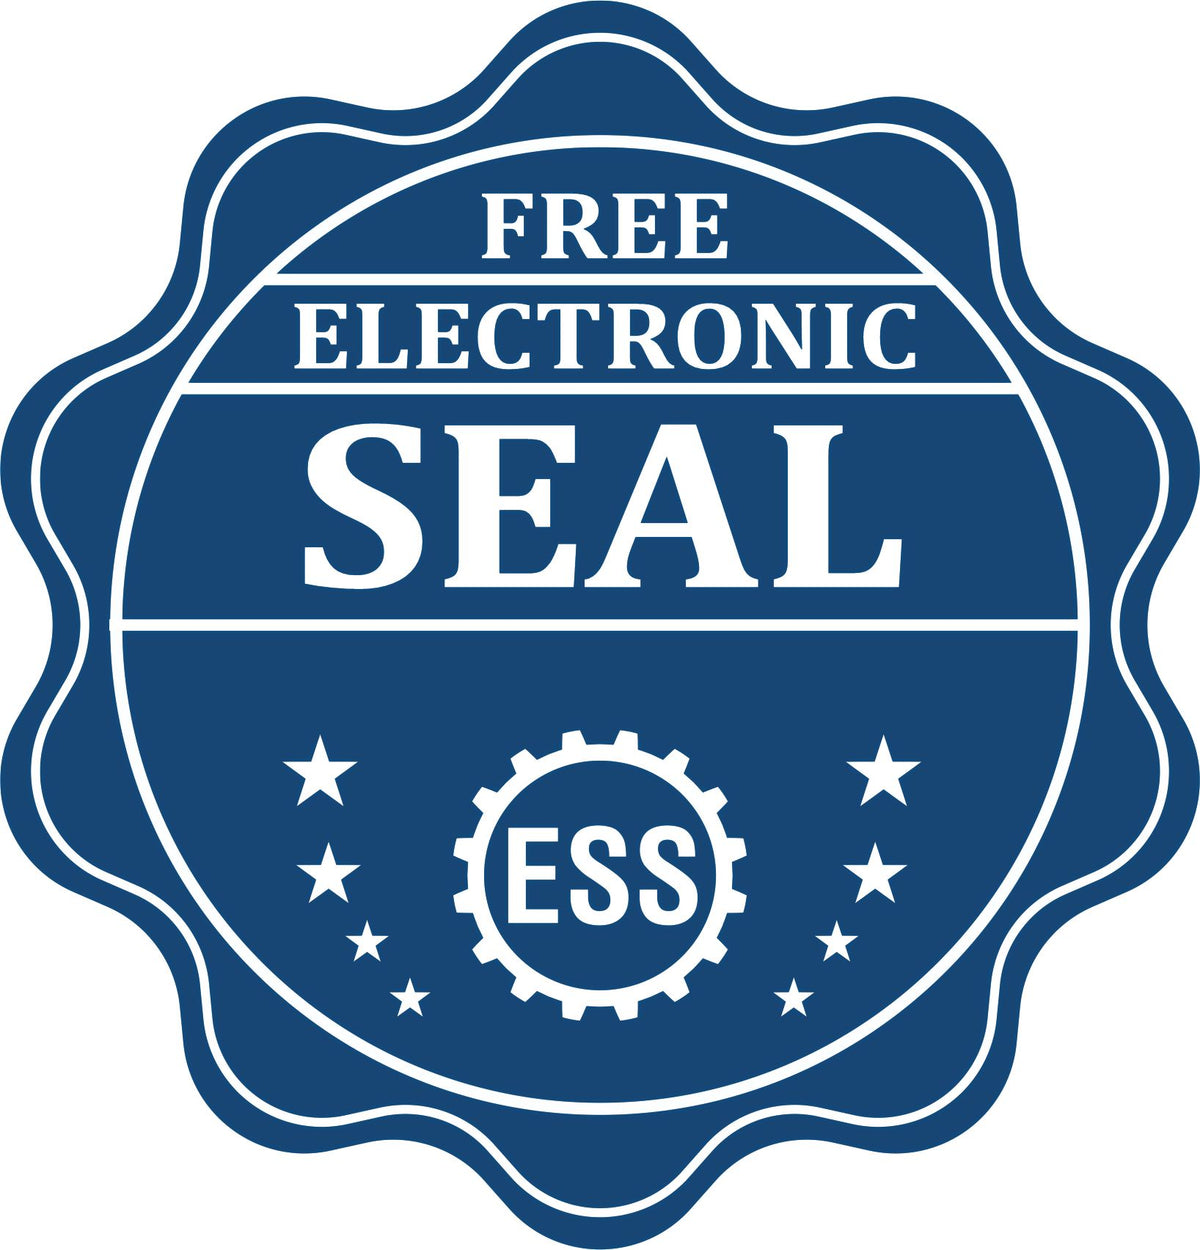 A badge showing a free electronic seal for the Soft Indiana Professional Engineer Seal with stars and the ESS gear on the emblem.